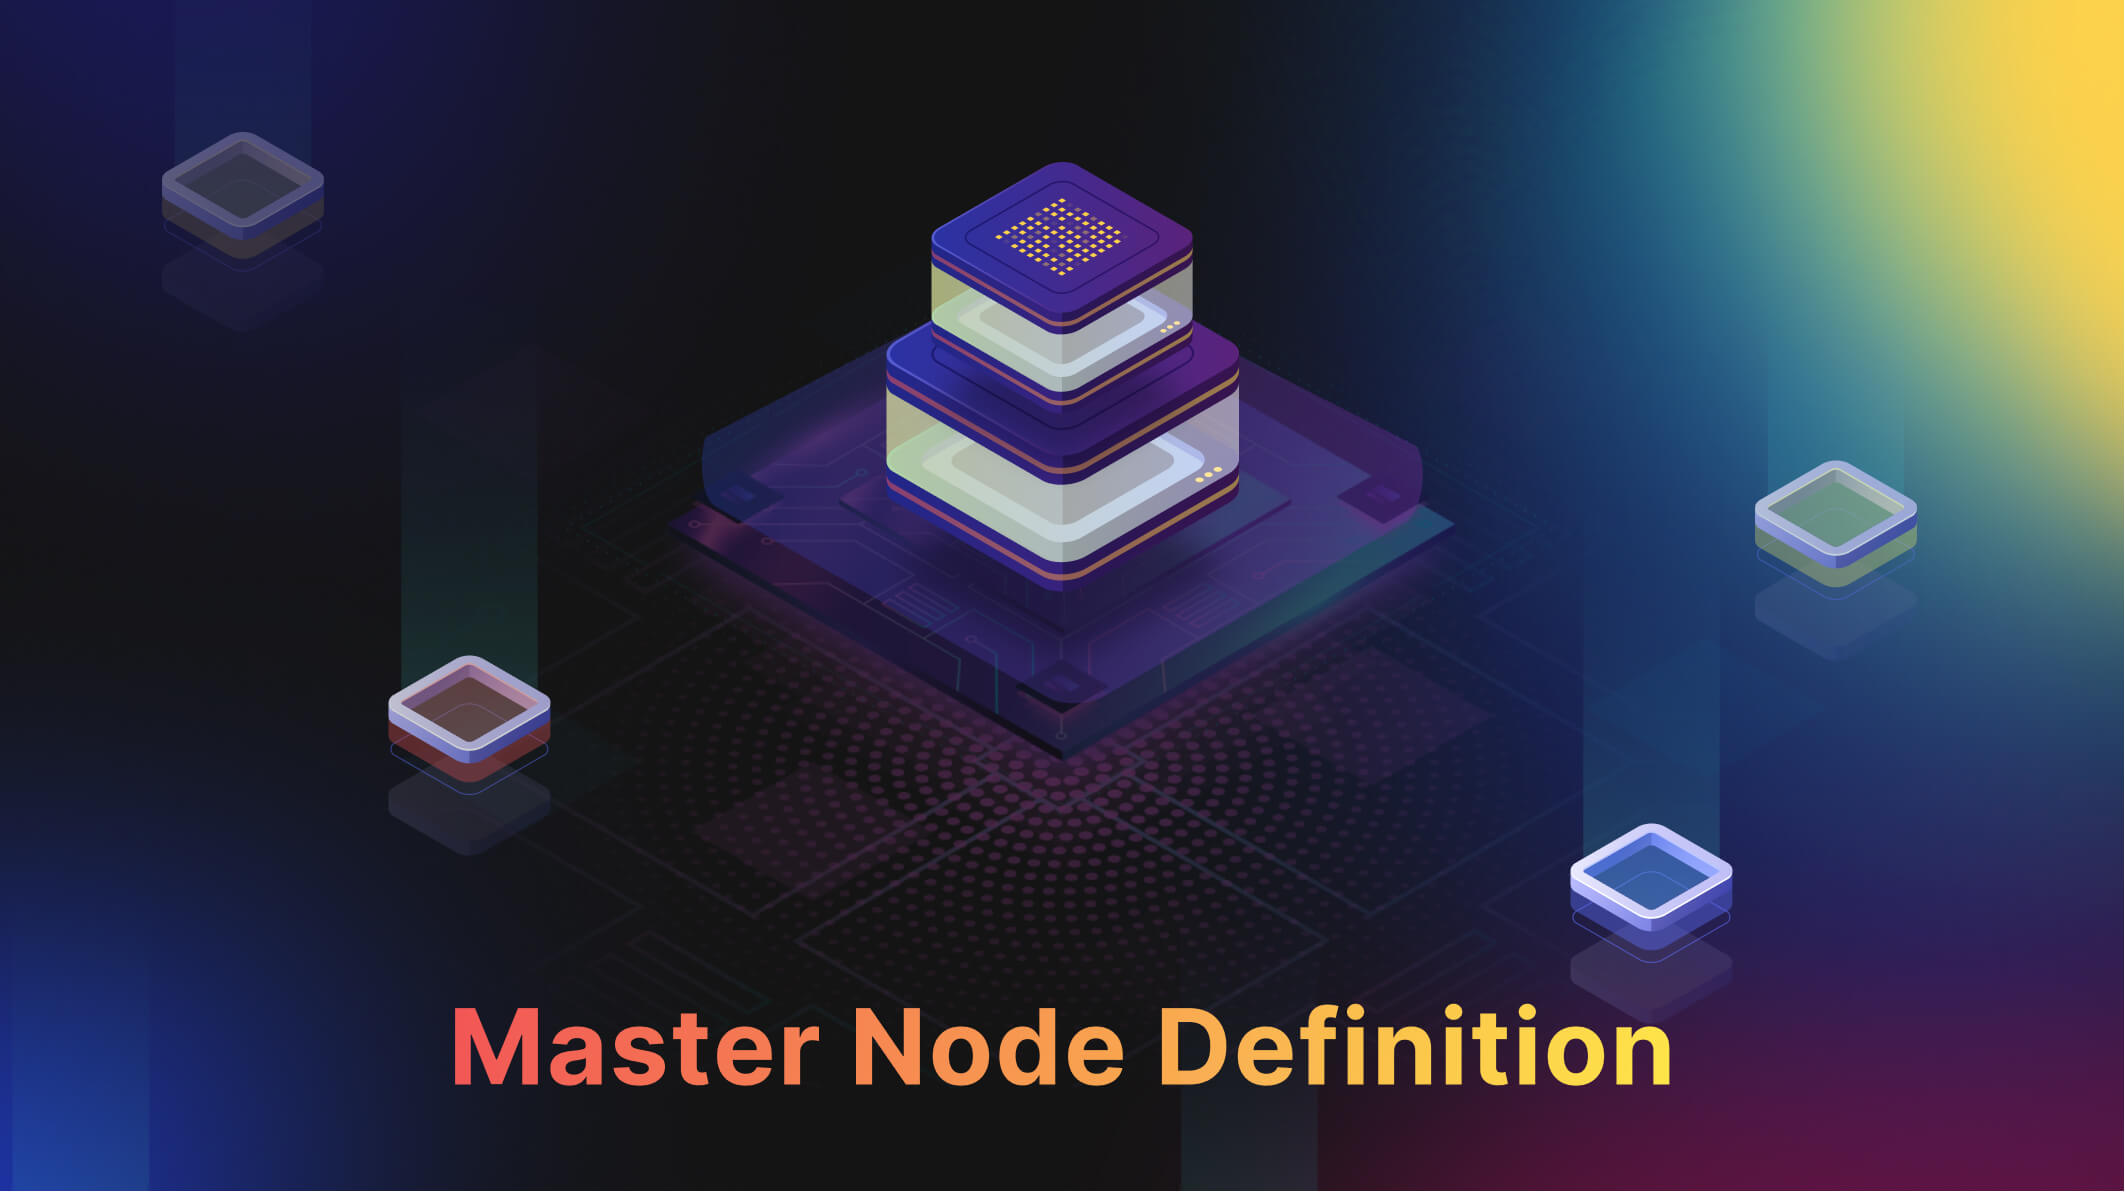 The Ultimate Crypto Masternodes Guide: Everything You Need to Know